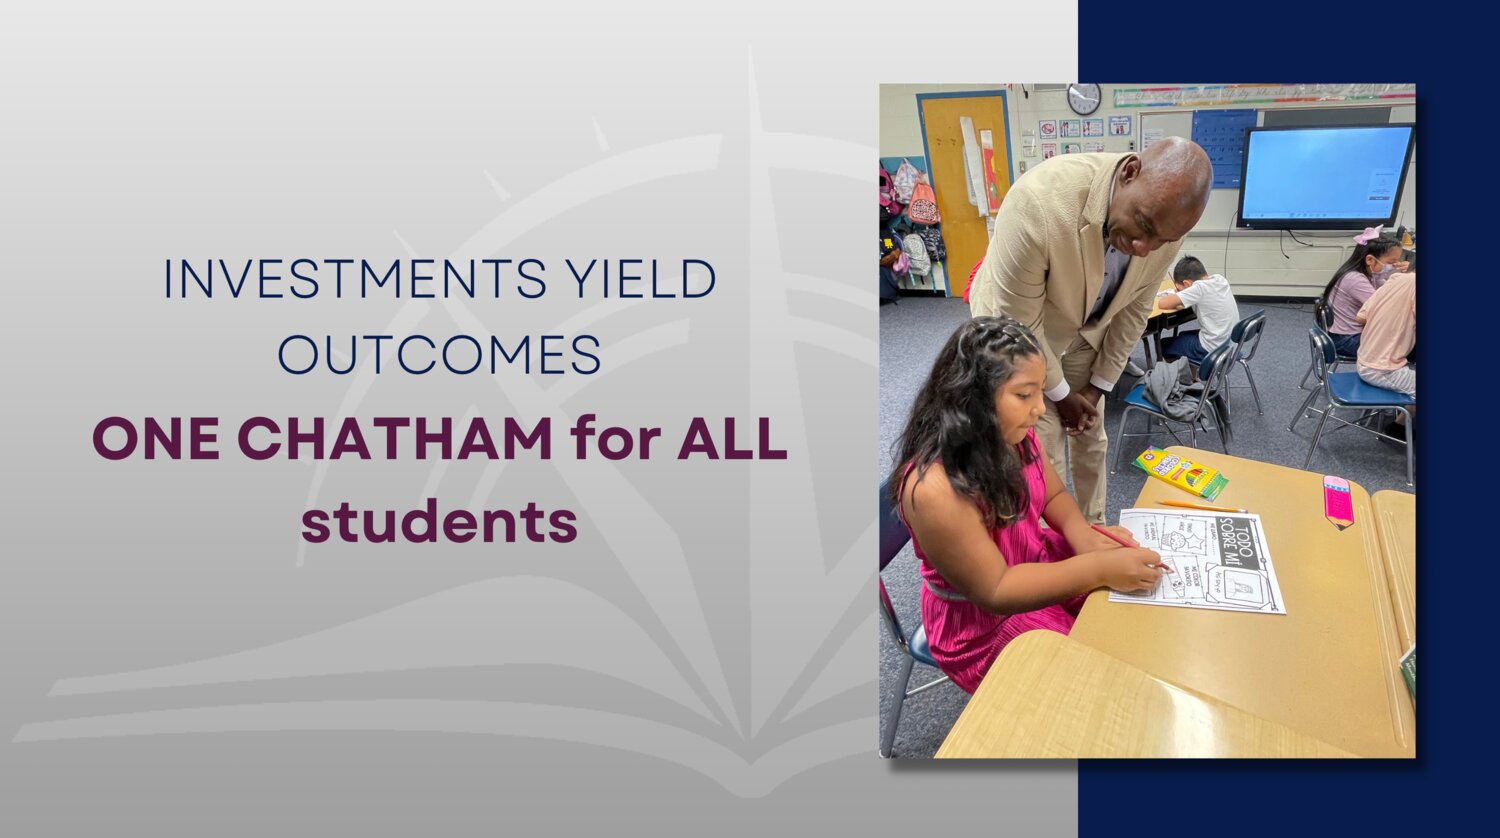 Last Tuesday, Chatham County Schools Superintendent Dr. Anthony Jackson shared the proposed budget with the school board. 'Investments yield outcomes,' was a central part of his pitch.